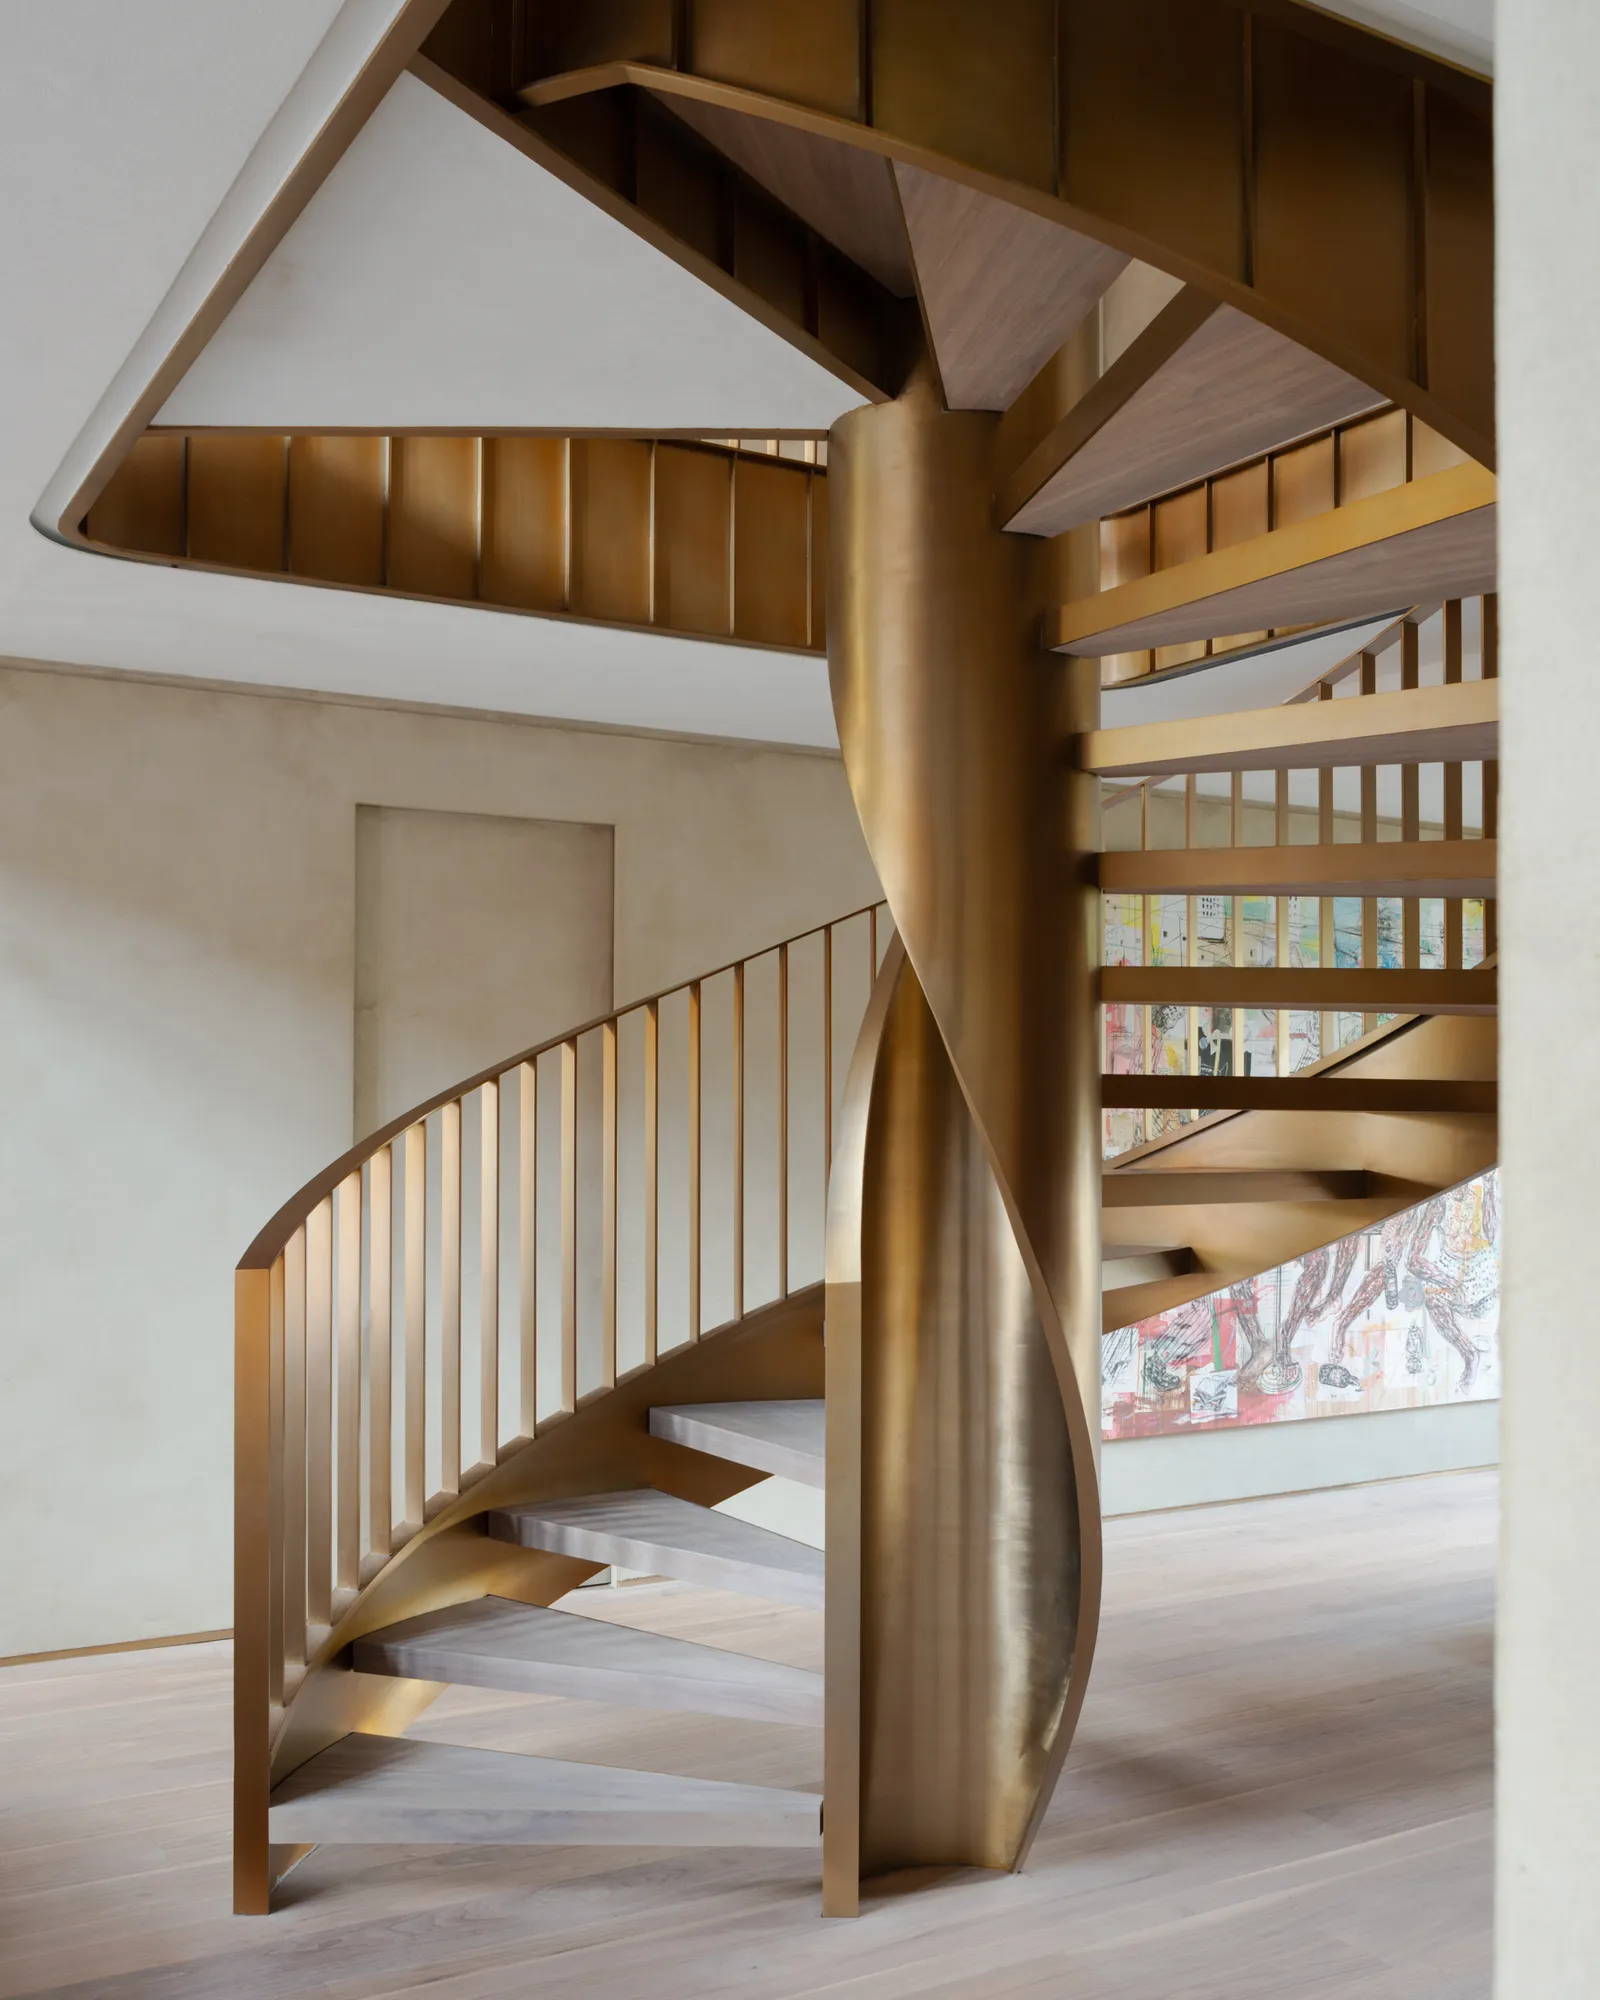 “The central element in the apartment is the staircase,”